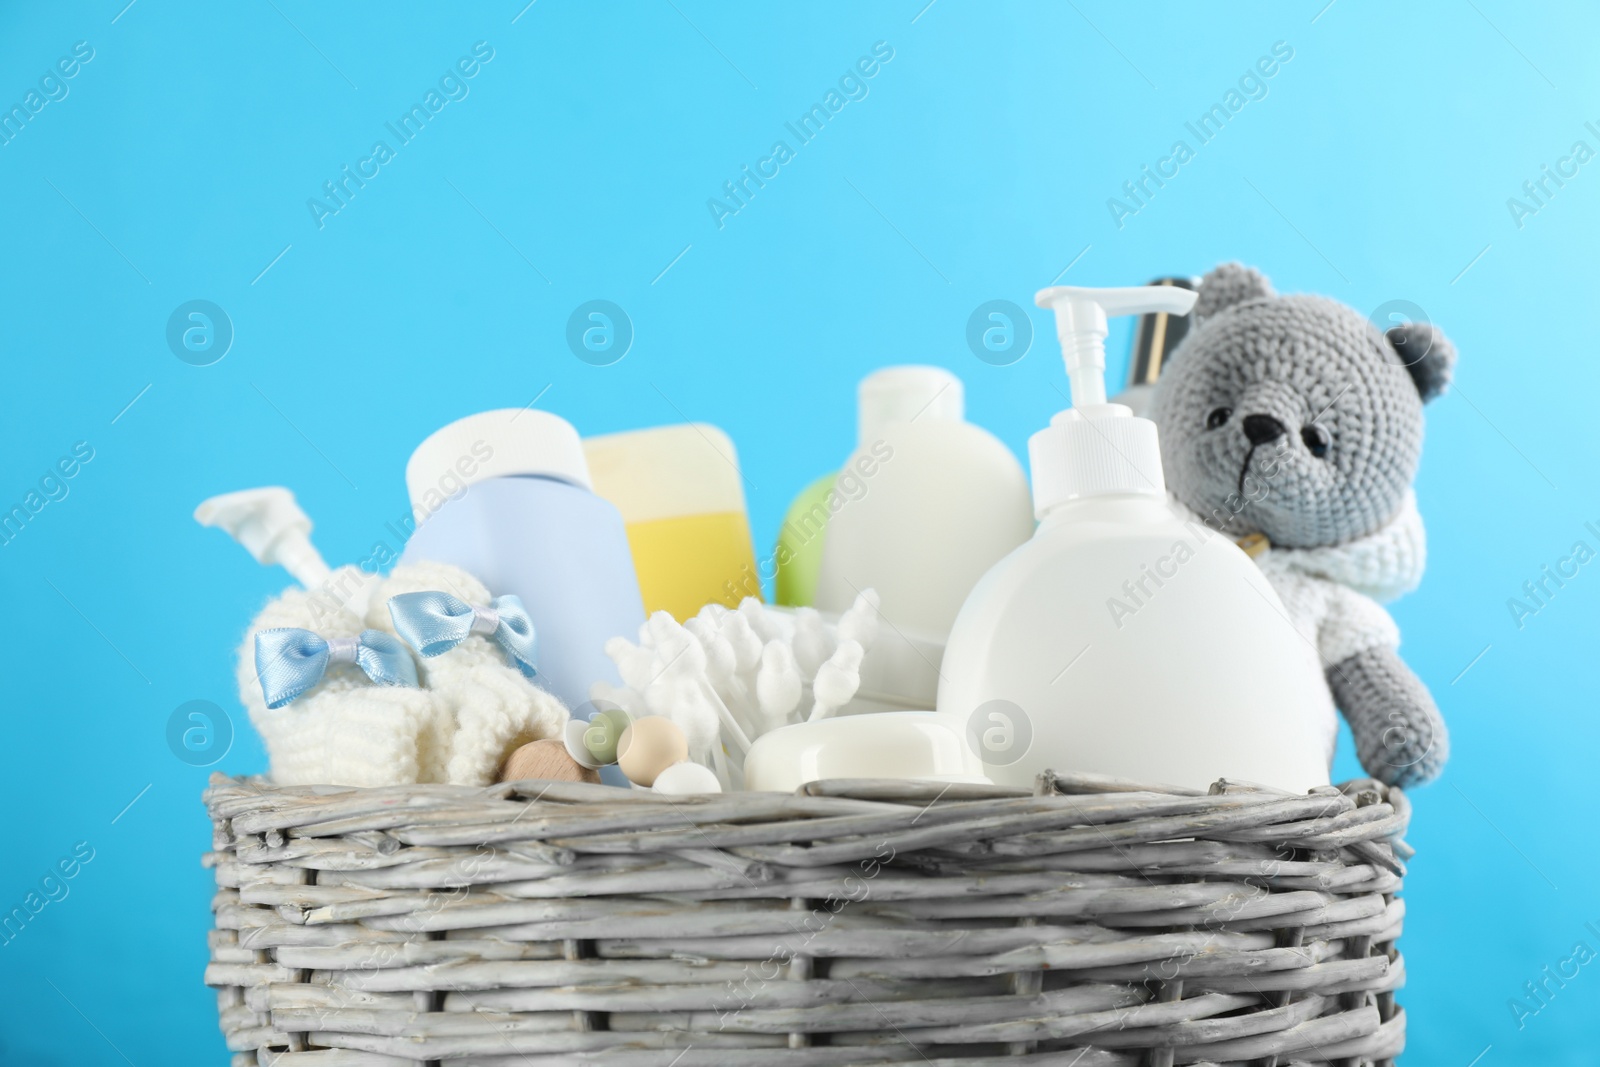 Photo of Wicker basket full of different baby cosmetic products, bathing accessories and toy on light blue background, closeup